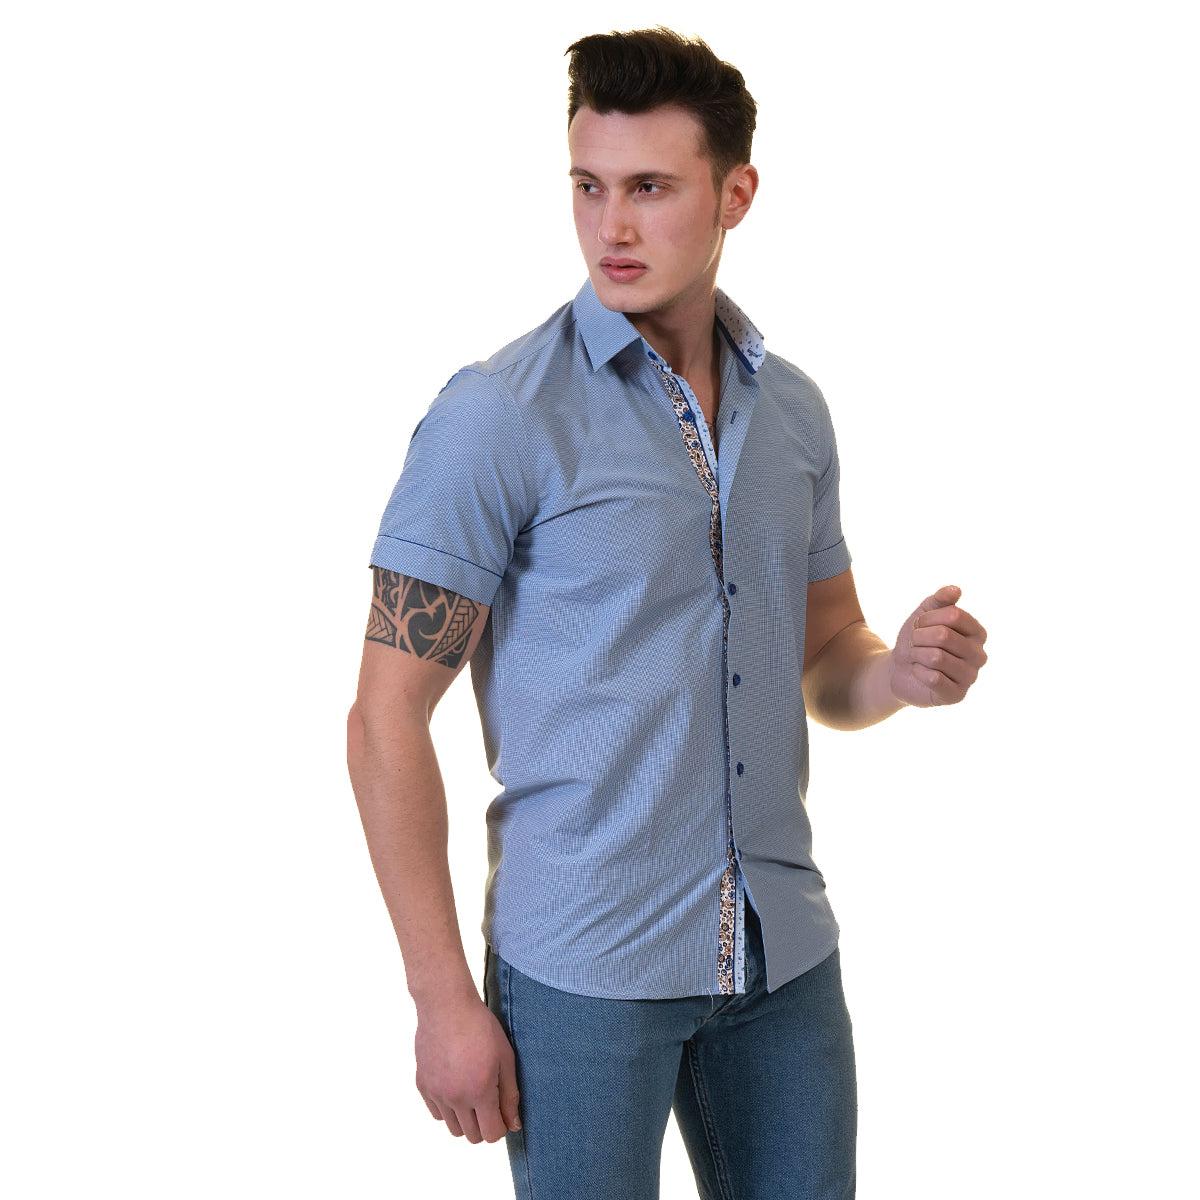 Blue Mens Short Sleeve Button up Shirts - Tailored Slim Fit Cotton French Cuff Shirts